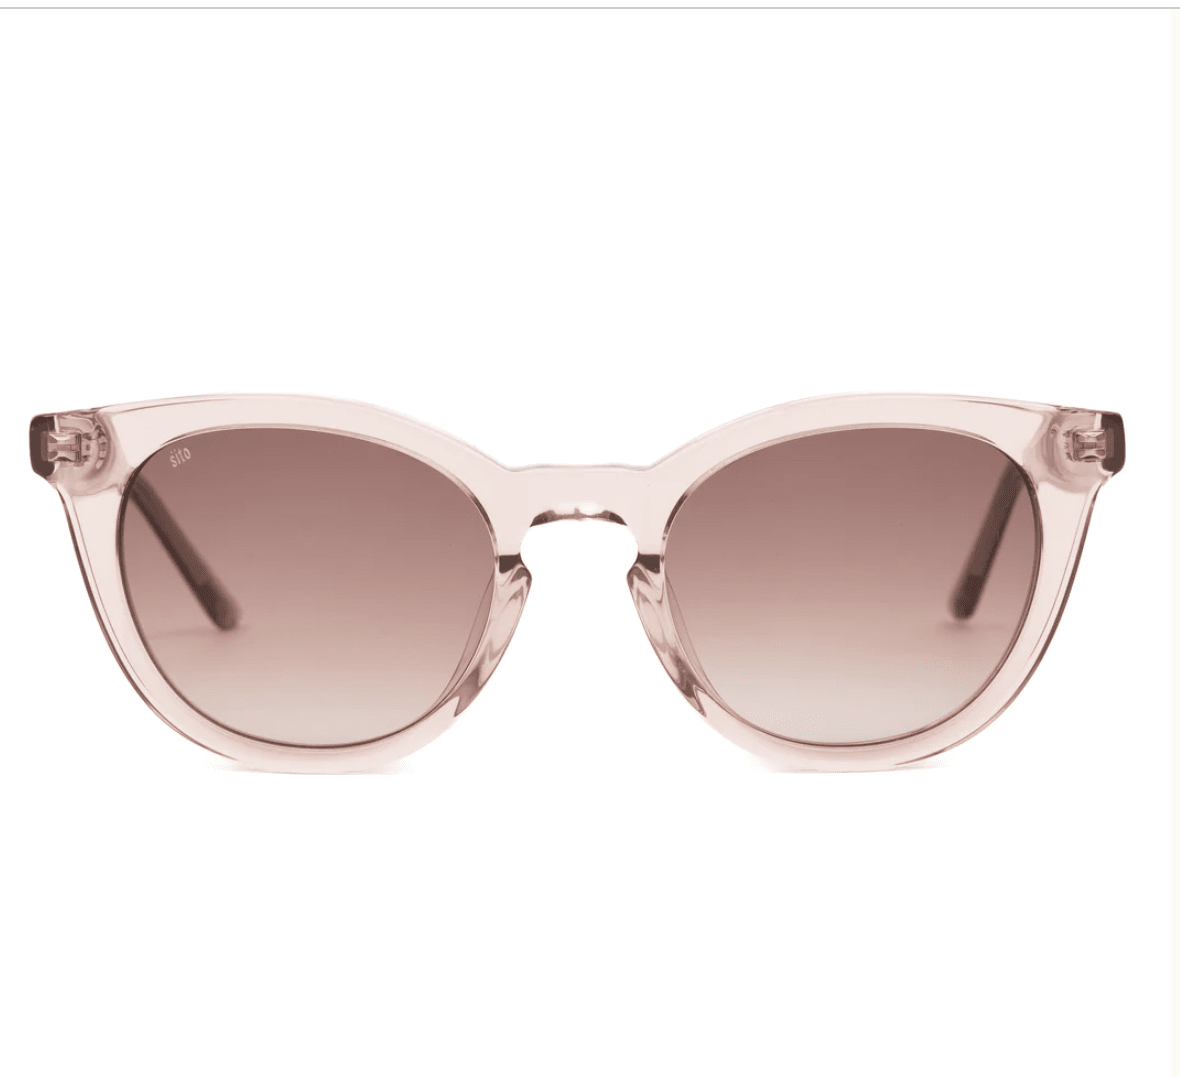 Now or Never-Sirocco Sunglasses Sito 